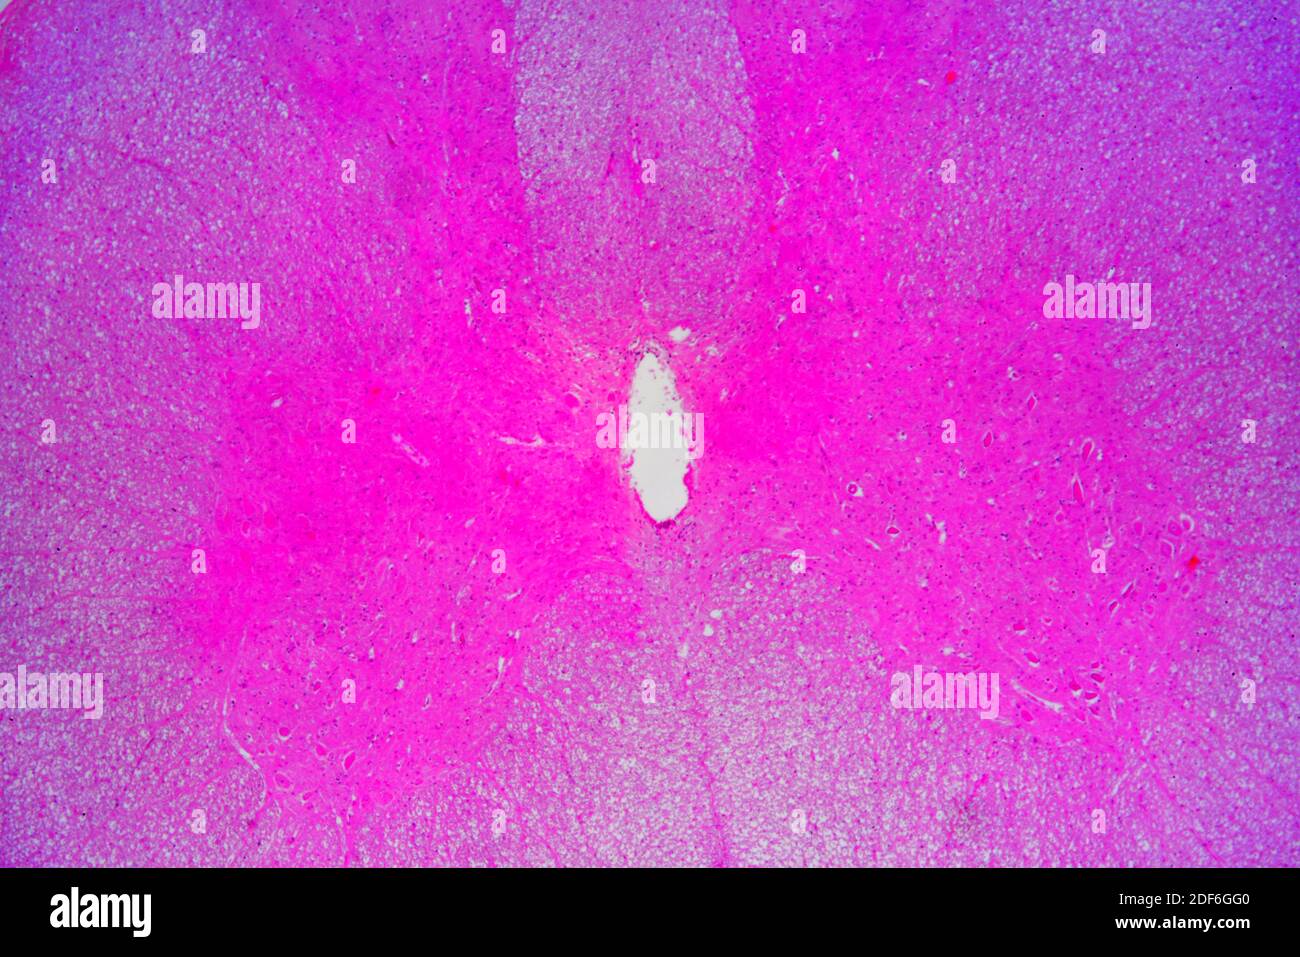 Spinal cord (nervous tissue) showing ependymous and grey matter. Optical microscope X100. Stock Photo